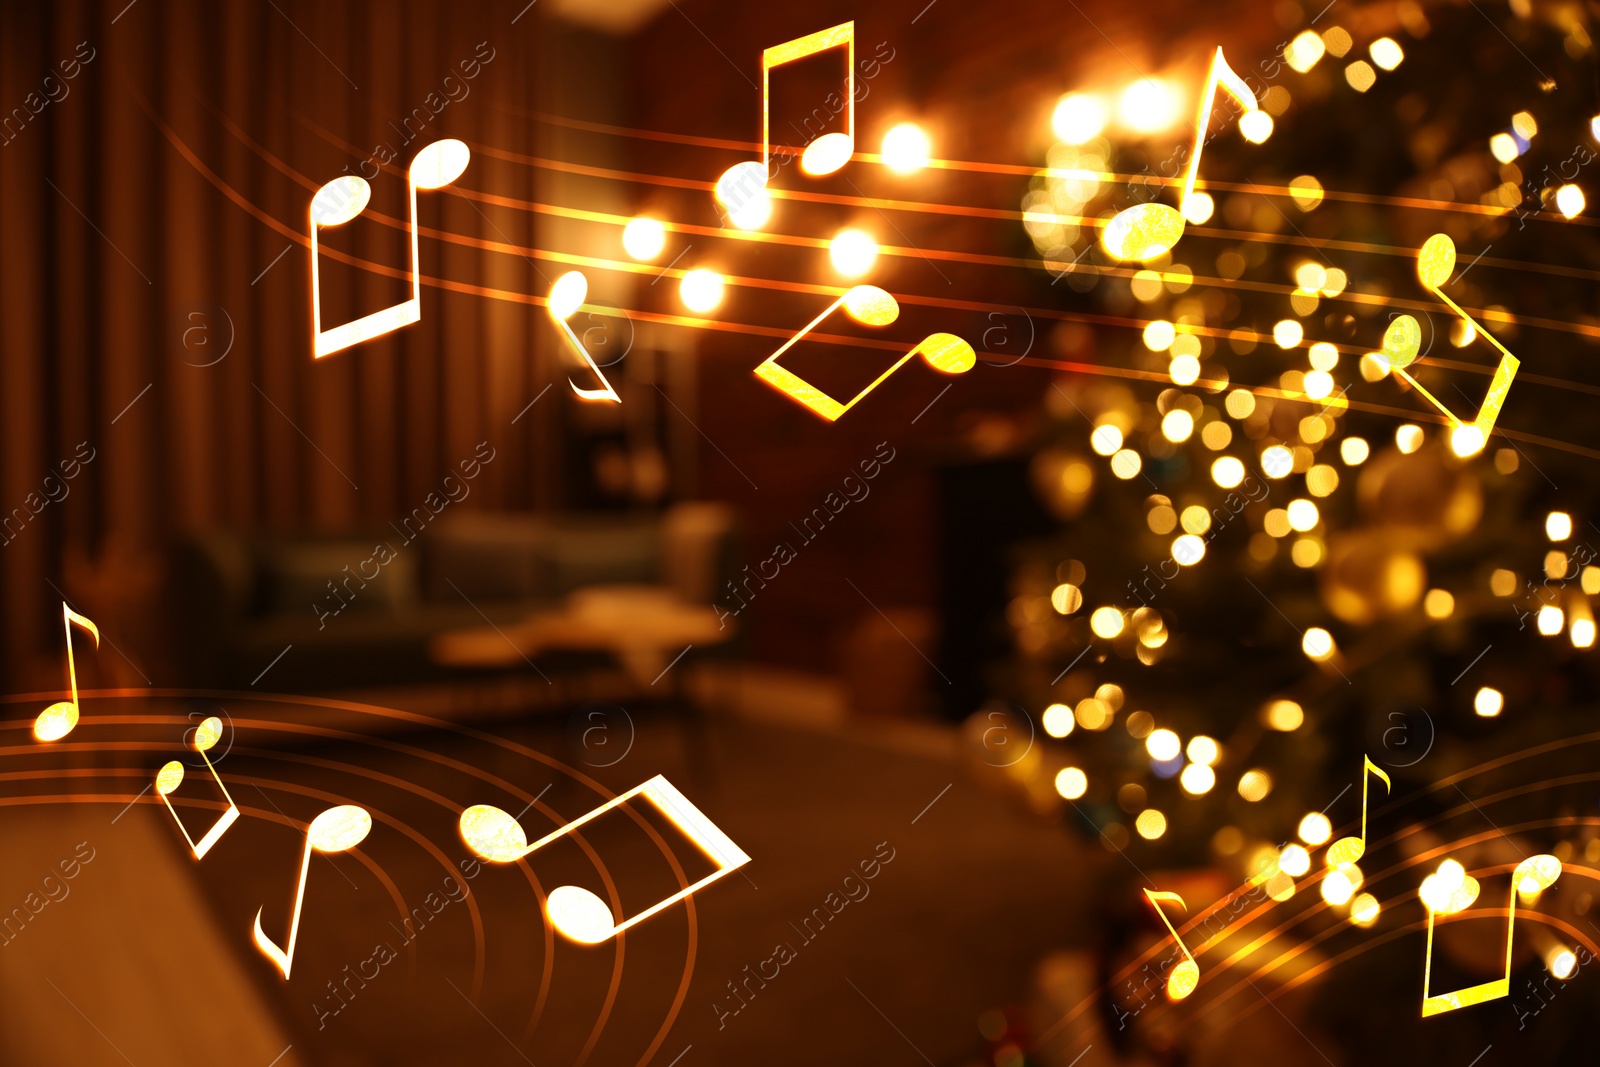 Image of Music notes and blurred view of room decorated for Christmas and New Year celebration, bokeh effect